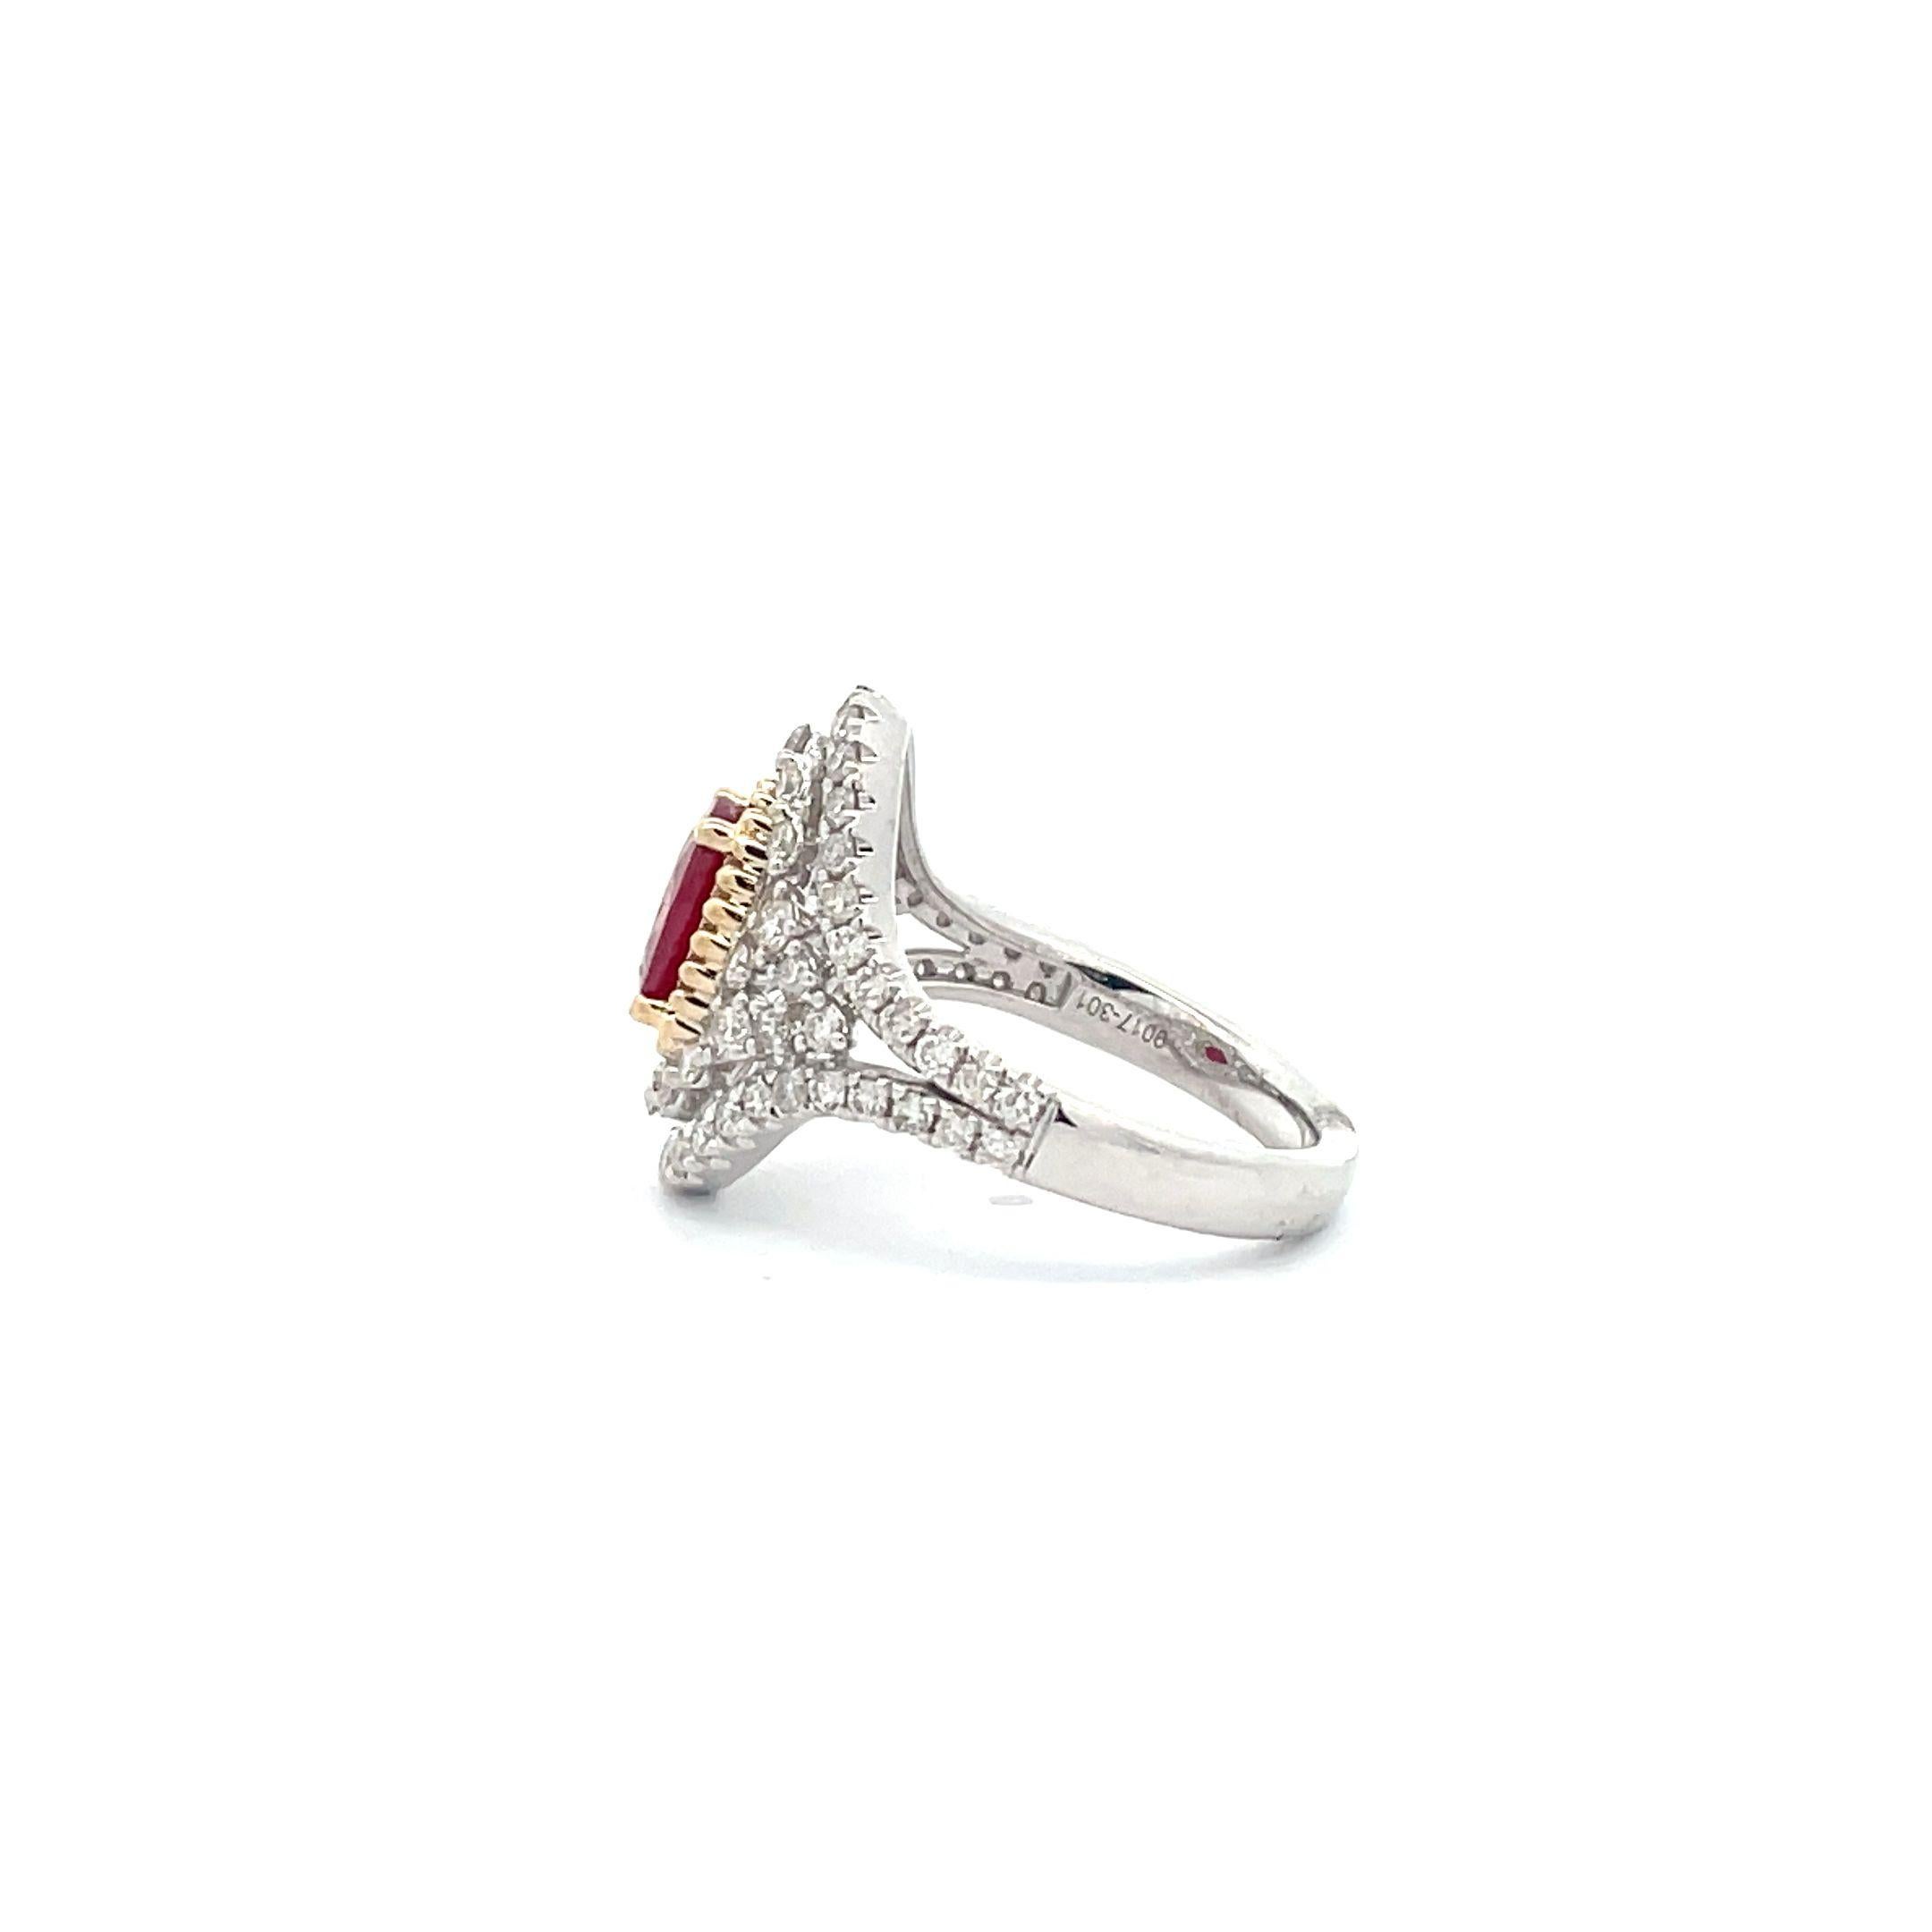 Oval Cut 1.40 Carat, Oval-Cut Ruby Diamond Cluster Halo Cocktail Engagement Ring